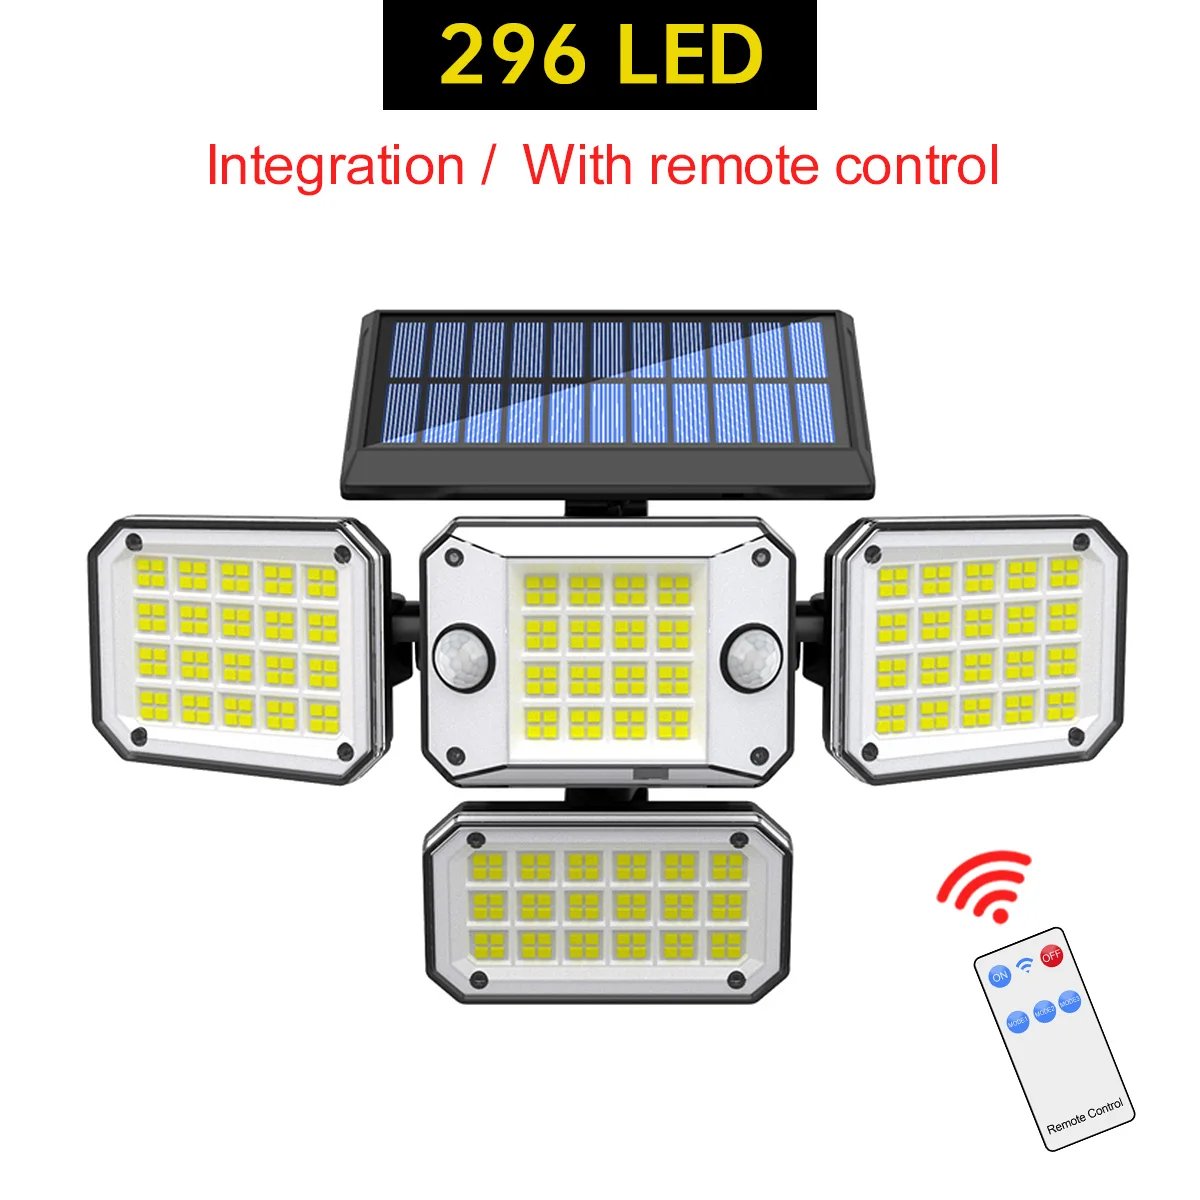 296led integrated